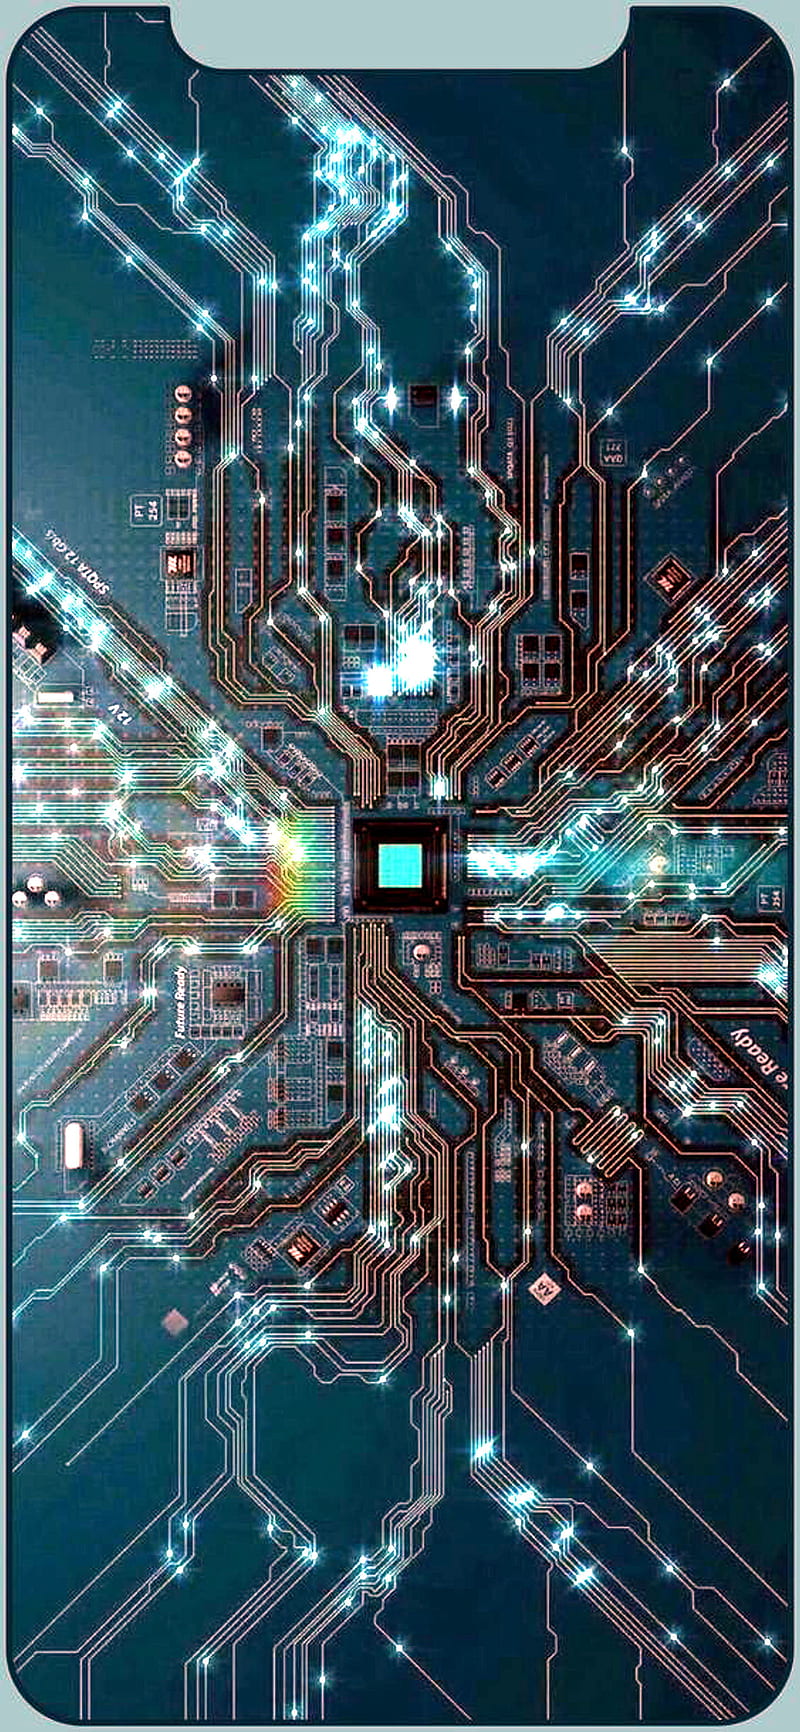 Motherboard Droid  Hd wallpaper android Phone wallpaper Technology  wallpaper